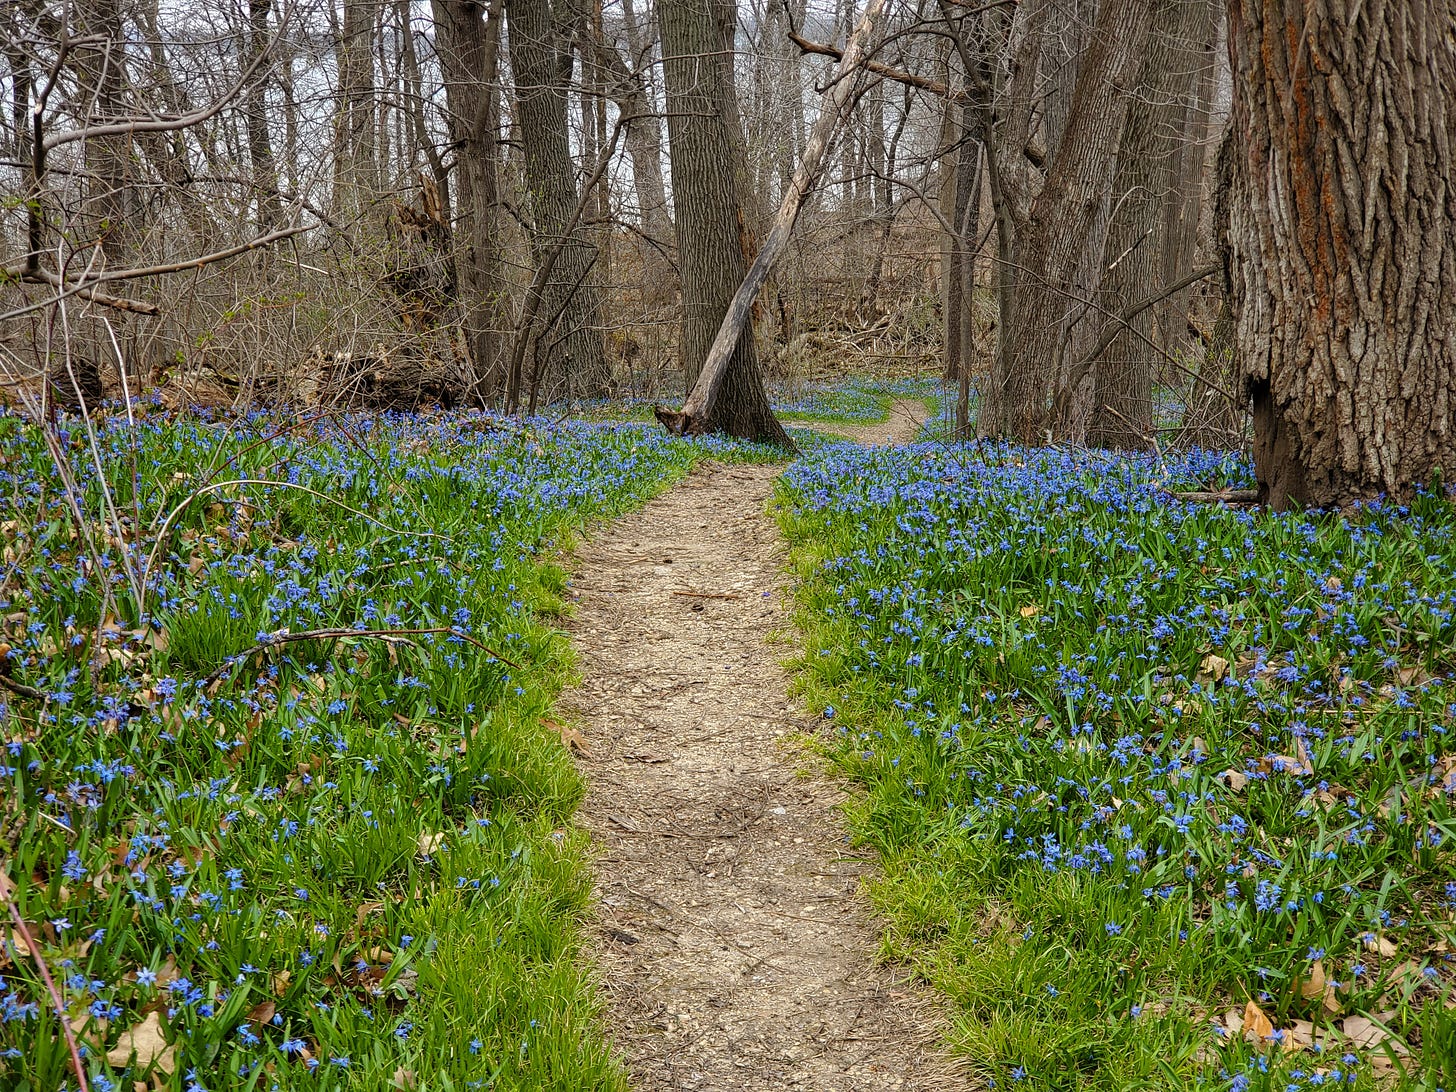 A dirt path winds between patches of bright green grass and hundreds of tiny, blue-purple flowers. Bare trees and a lake can be seen in the background.